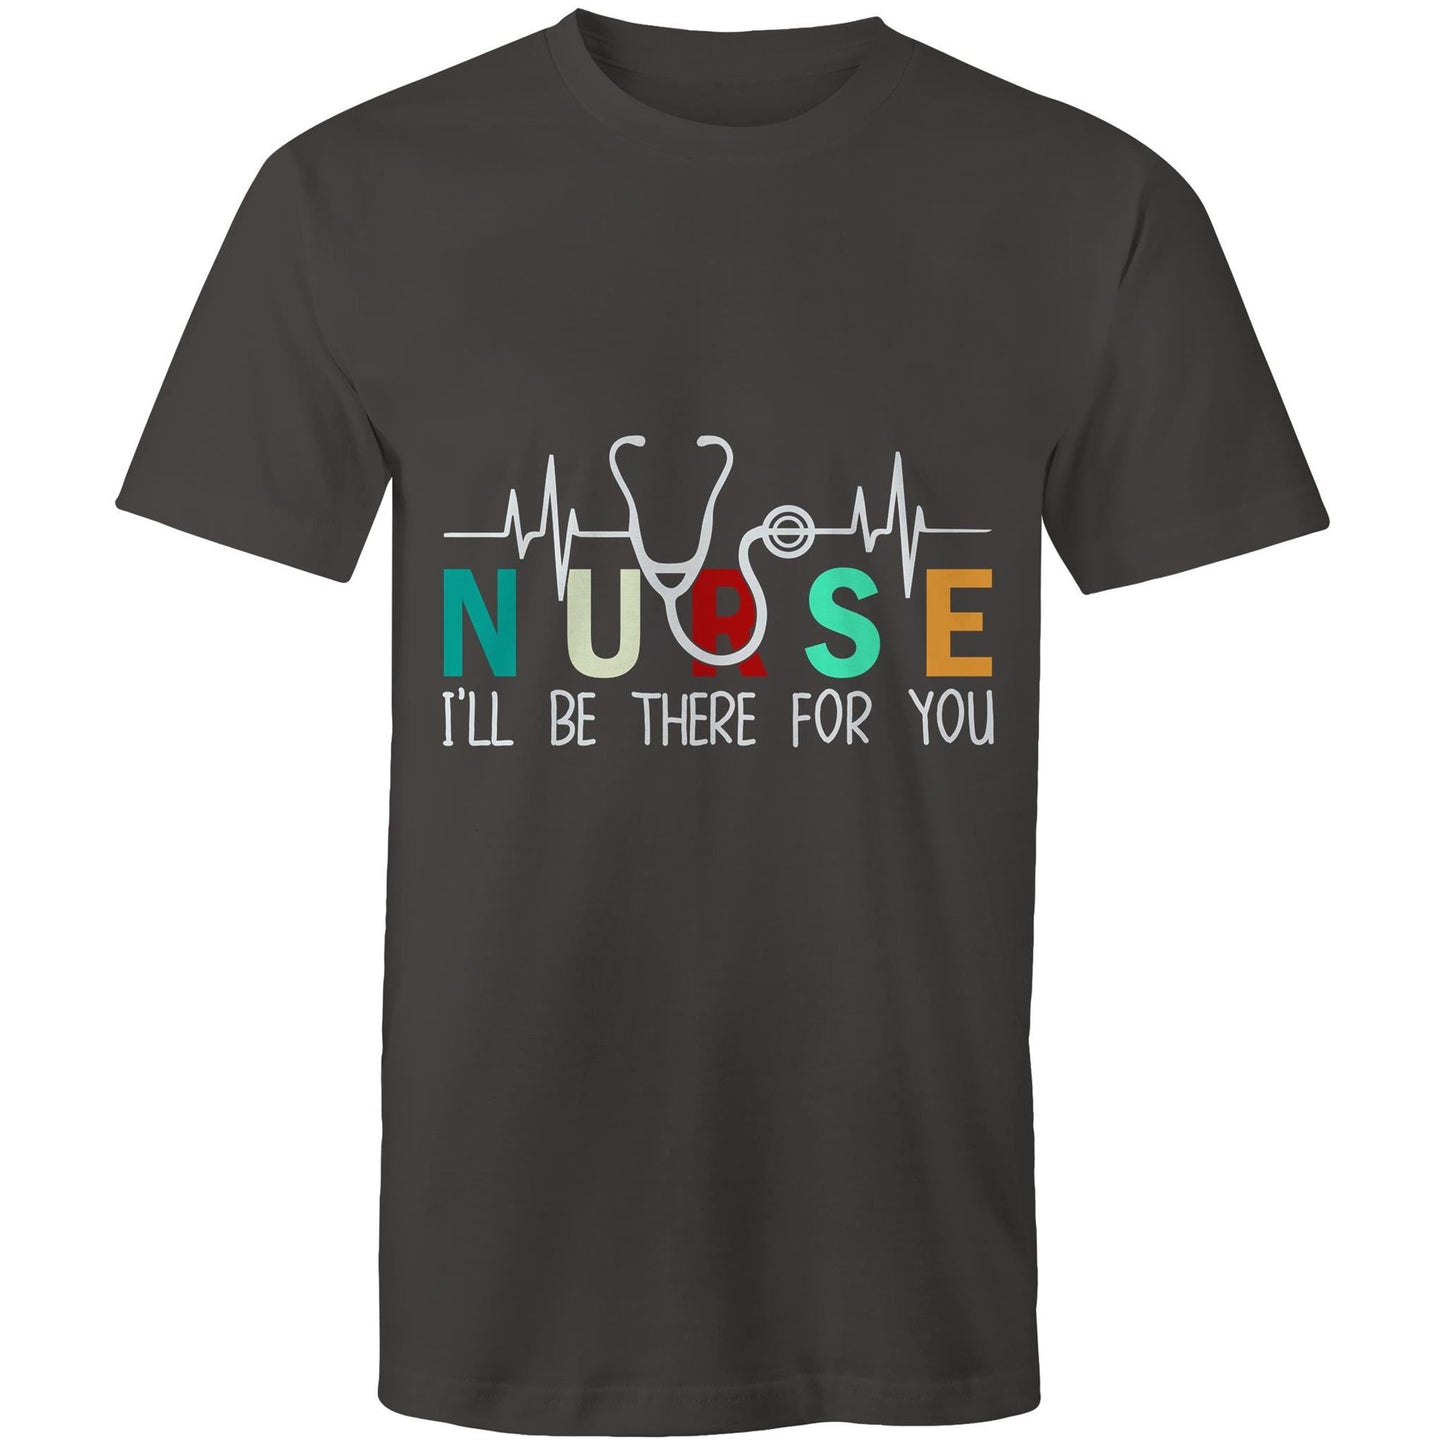 I’ll be There for You NurseMens T-Shirt